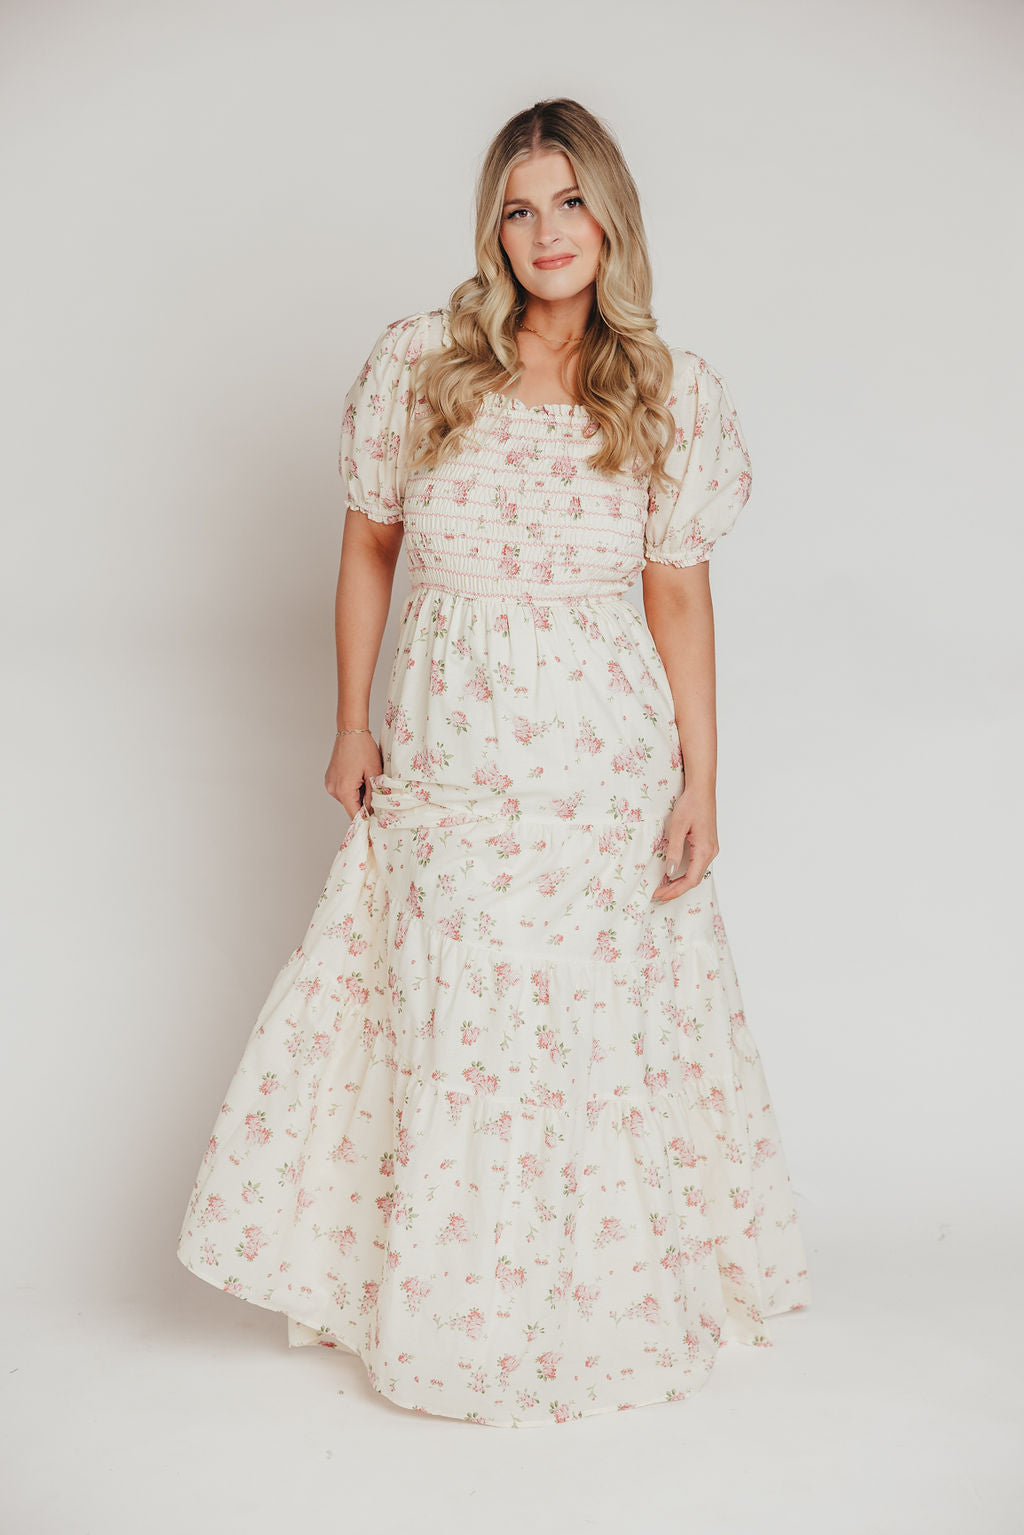 Harper Worth Maxi Dress in Ivory/Pink Floral - Inclusive Sizing (S-3XL) - Bump Friendly ($30 OFF PRE-ORDER ONLY) Arrives 4/30